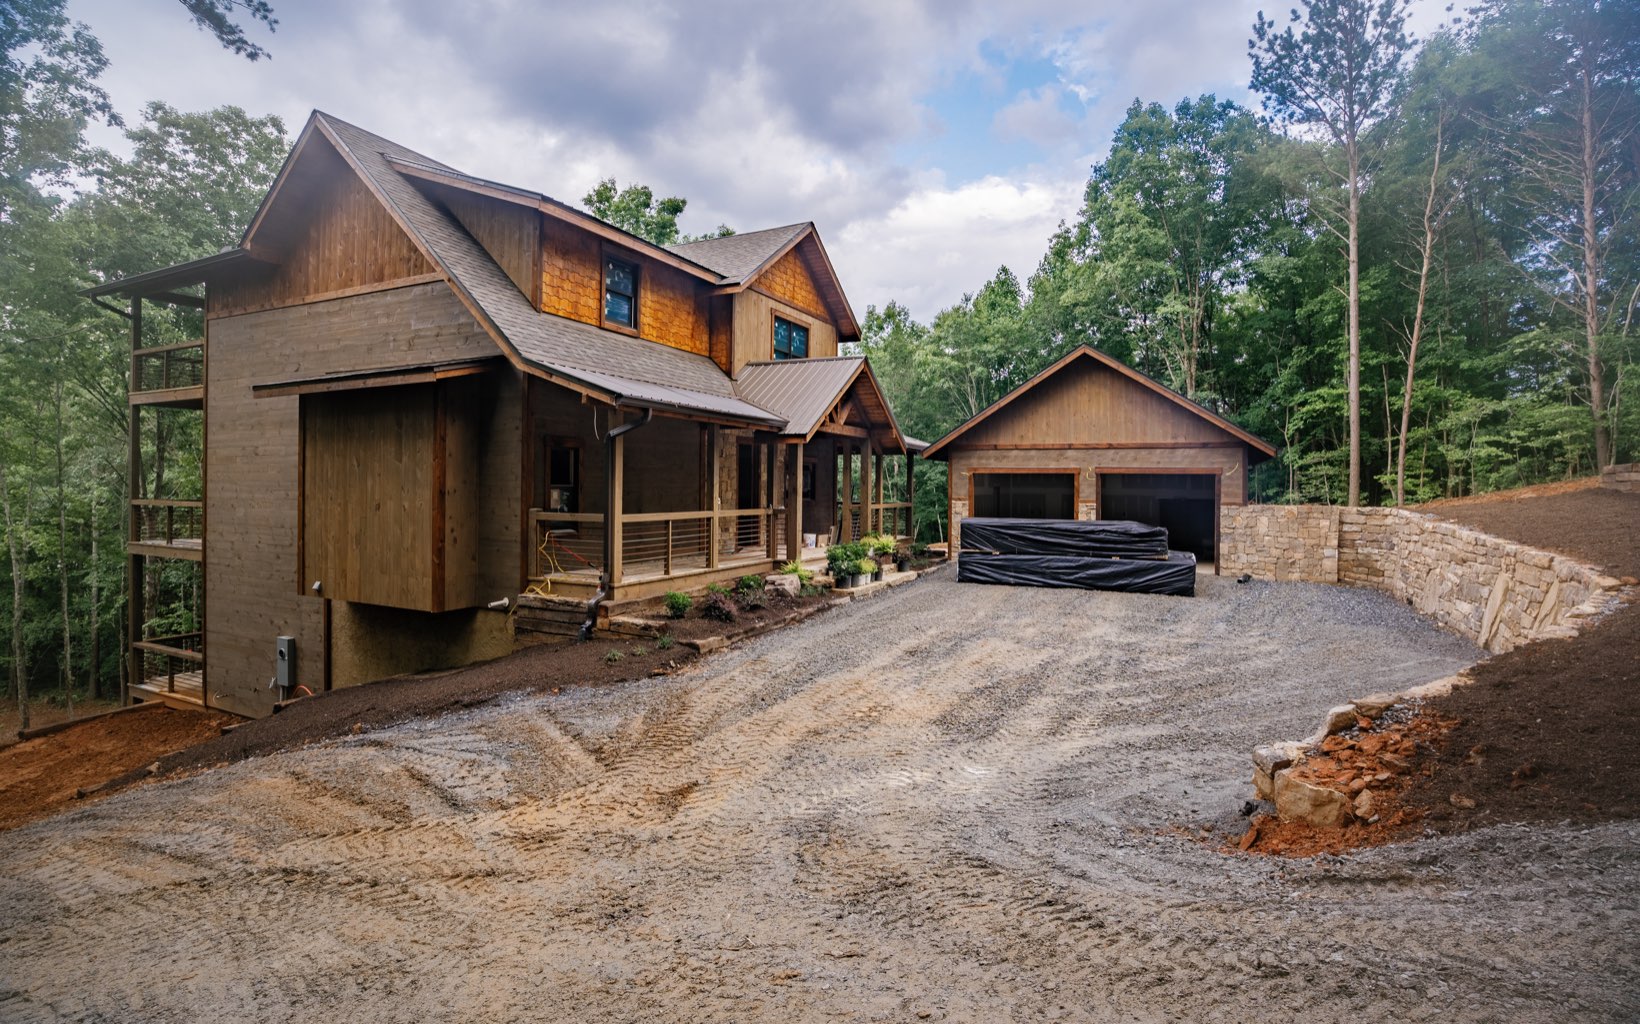 Enjoy the luxuries of modern rustic living in this stunning new construction creation by Lomonaco Log Homes! Welcome to "Creekside," a home w/ a blend of modern and rustic finishes and three levels of outdoor decks overlooking a beautiful backyard and steps down to the noisy & wide creek. Inside, home is complete w/ three full ensuites, two additional half bathrooms, and a large sleeping loft or fourth bedroom! Beautiful hardwood floors, stacked stone F/P's, S/S appliances, walk-in tile showers, and cathedral ceilings adorn the retreat w/ warmth and textures. Large sliding glass doors let the outdoors in throughout the entertaining spaces. Terrace level den is complimented w/ a wet bar, living and gaming space. With boulder walls, beautiful landscaping, and LARGE two car garage, this home won't last long.